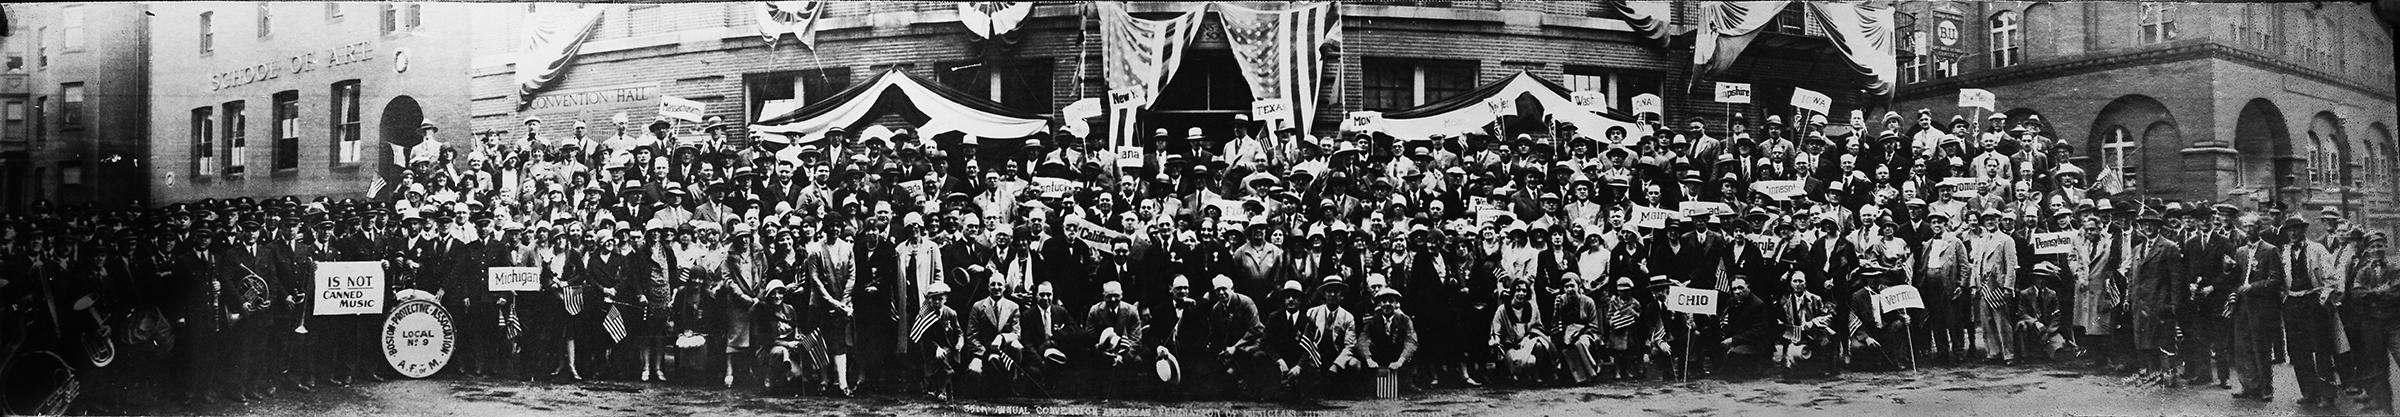 Musicians from throughout the United States and Canada gather in solidarity at the 35th AFM Convention in Boston, 1930. (Photo: courtesy International Musician/AFM archives)